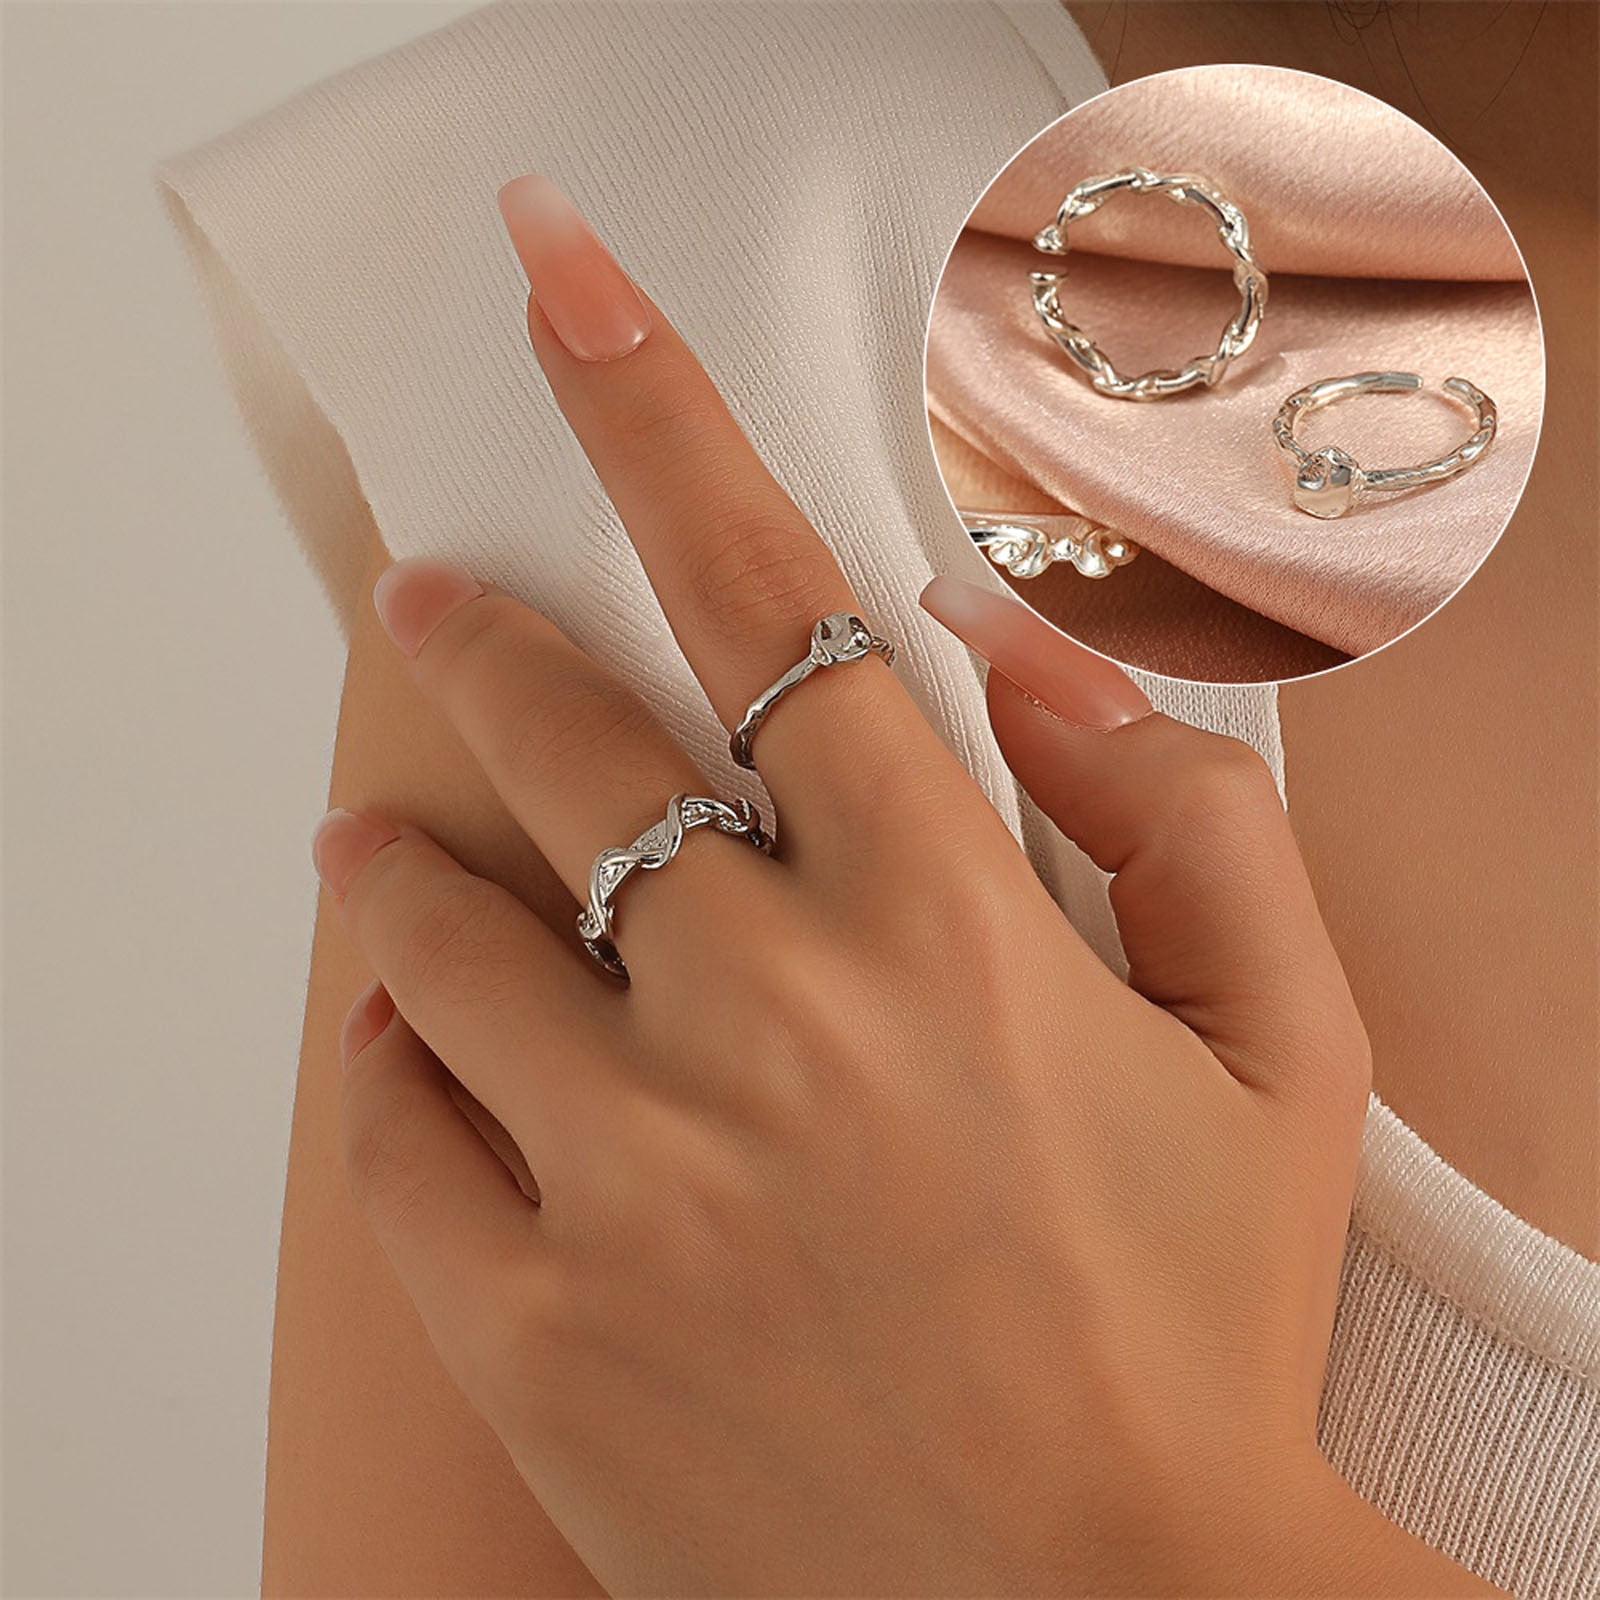 Jikolililili Irregular Ring Two-piece Index Finger Ring Personality  Fashionable and Versatile Jewelry Hypoallergenic Rings Christmas 2022 Deals